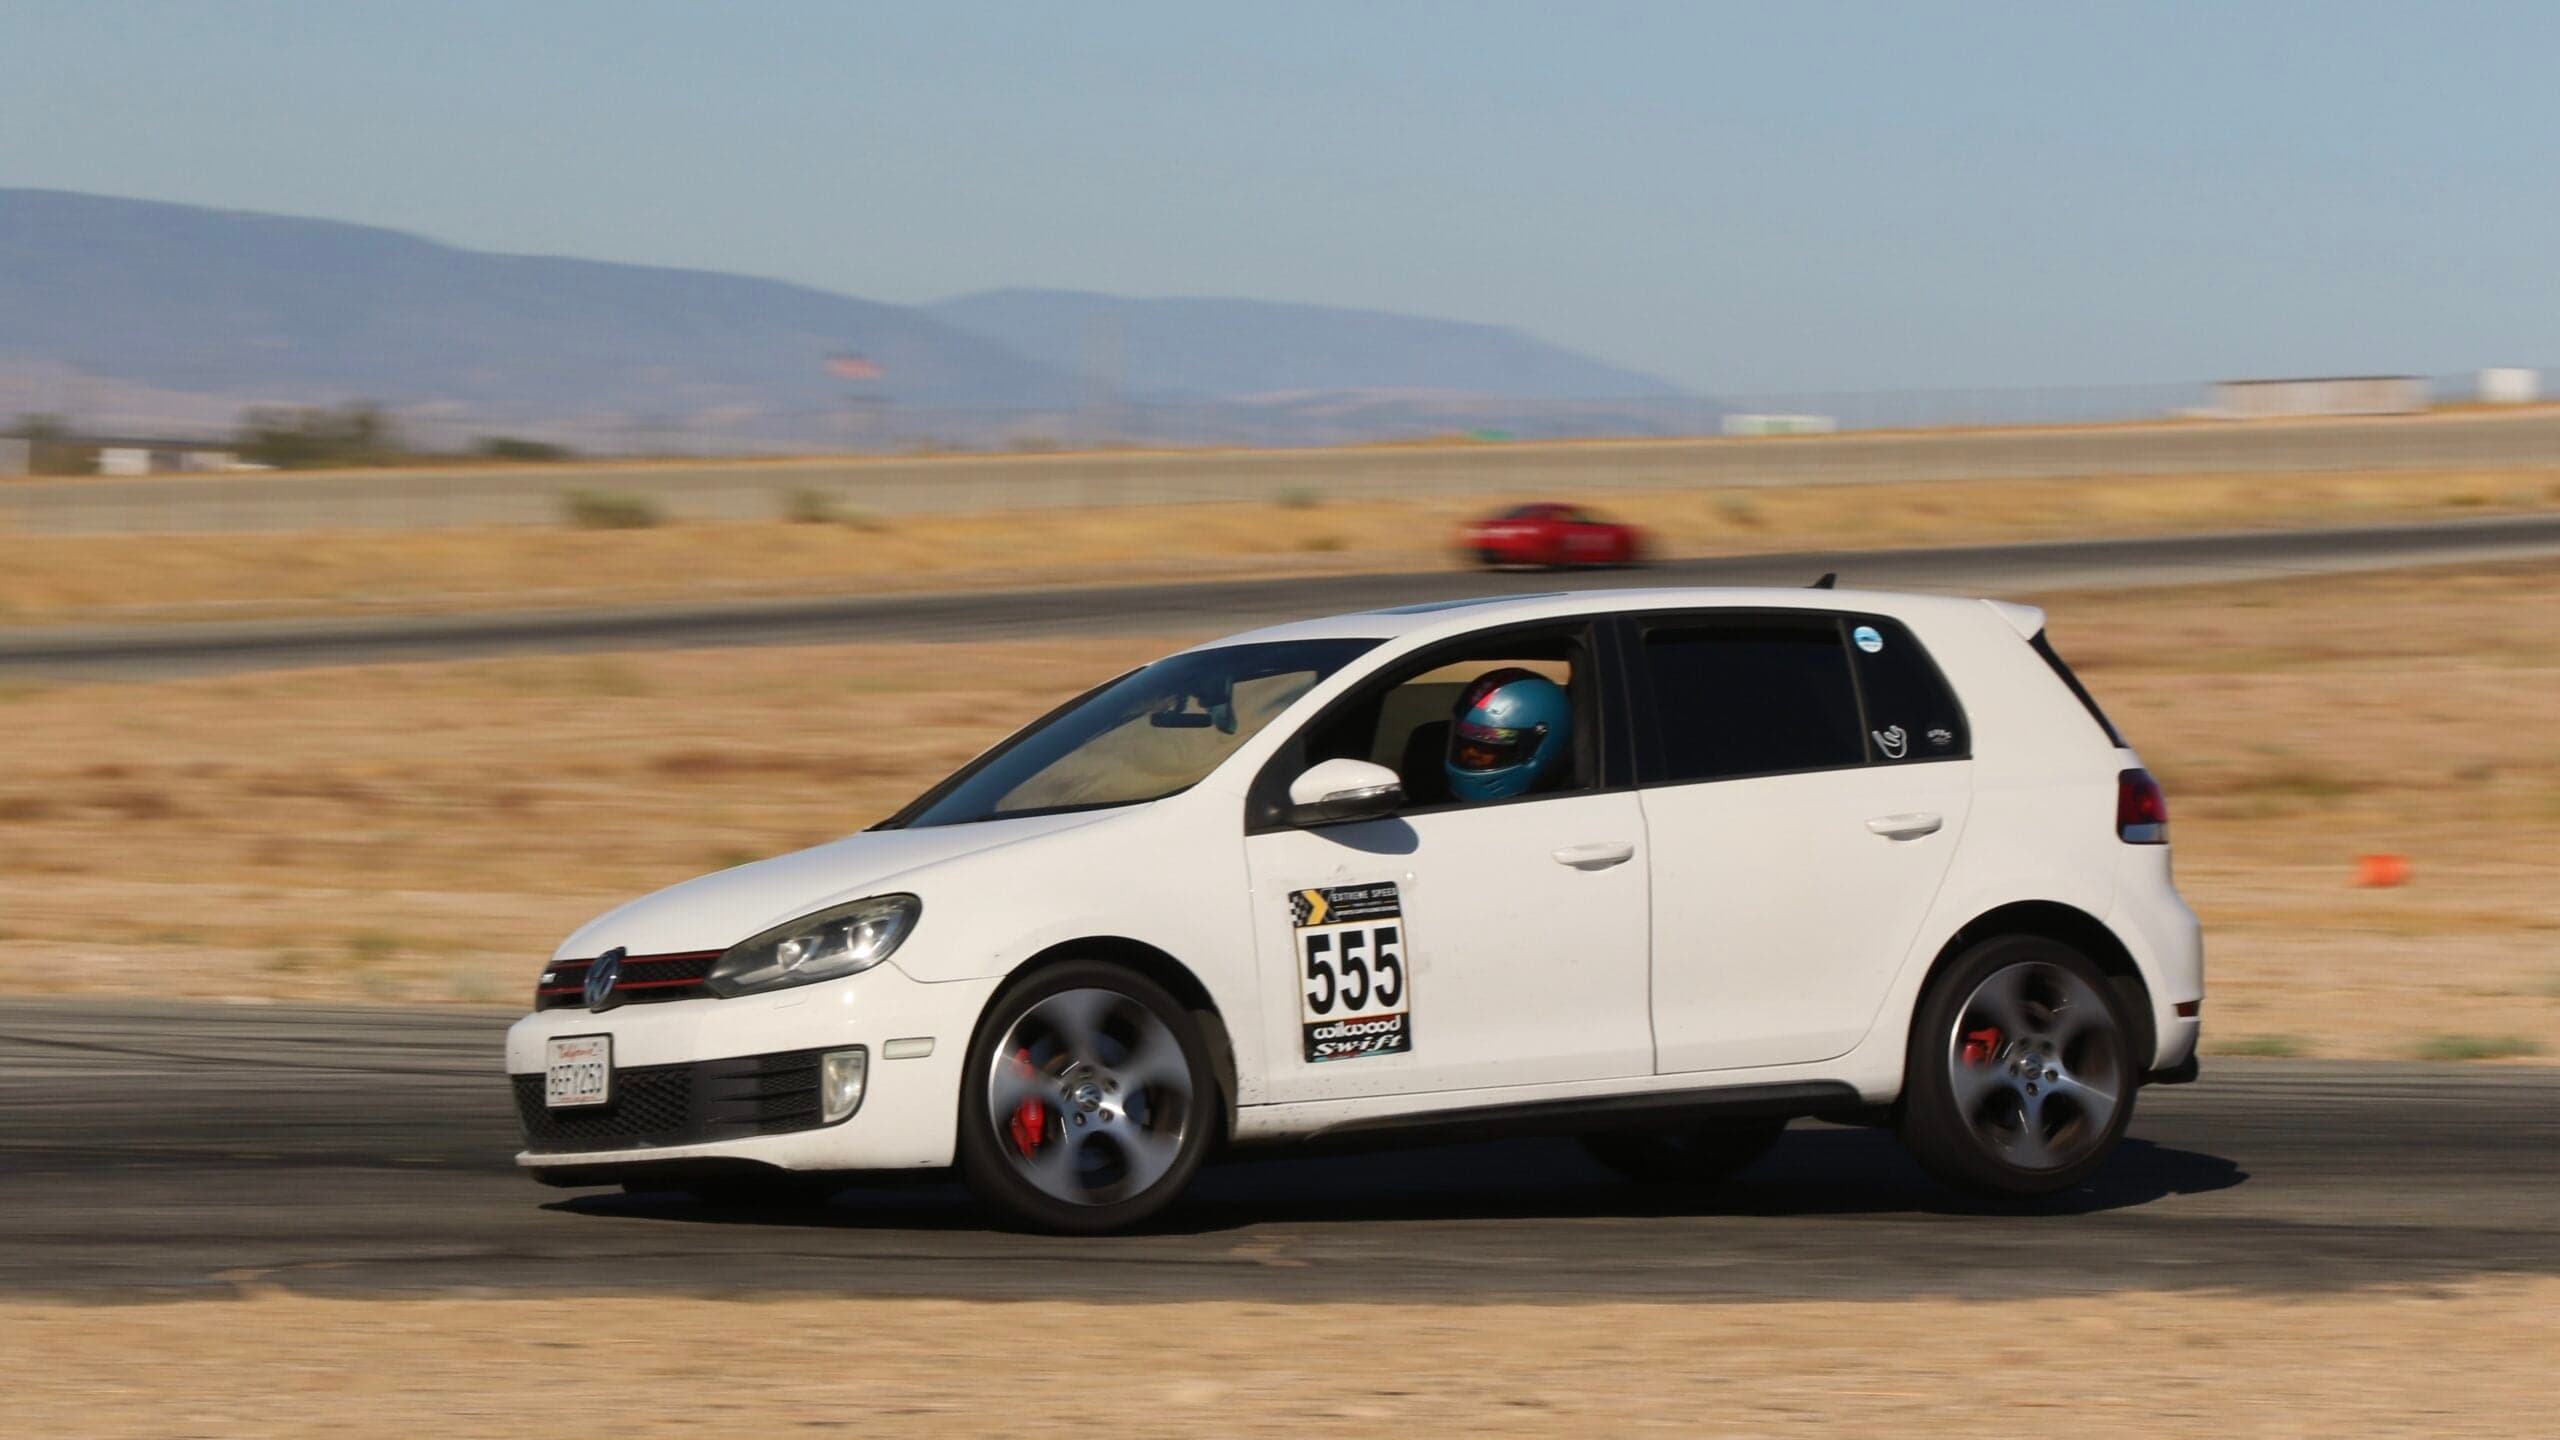 How I Used Coding To Defeat My VW GTI’s Stability Control Systems